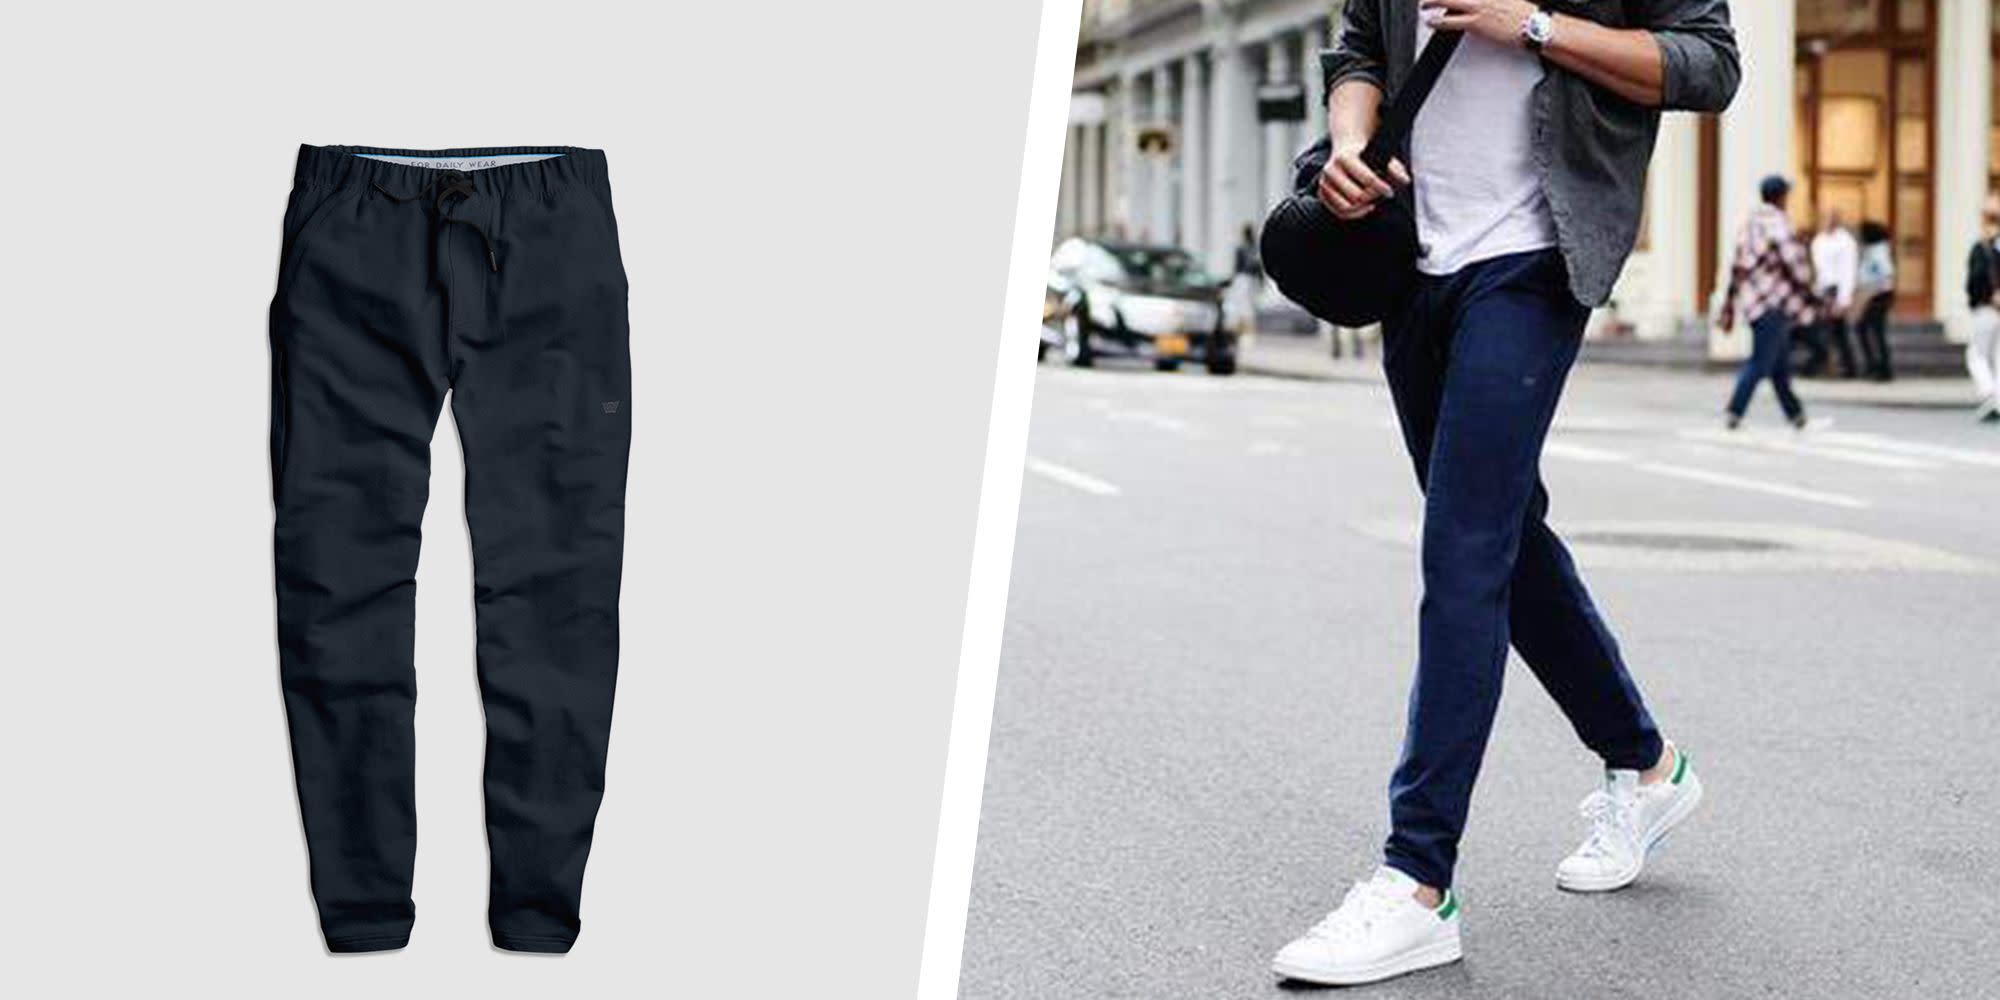 The 21 Best Sweatpants That Won't Make You Look Like a Slob